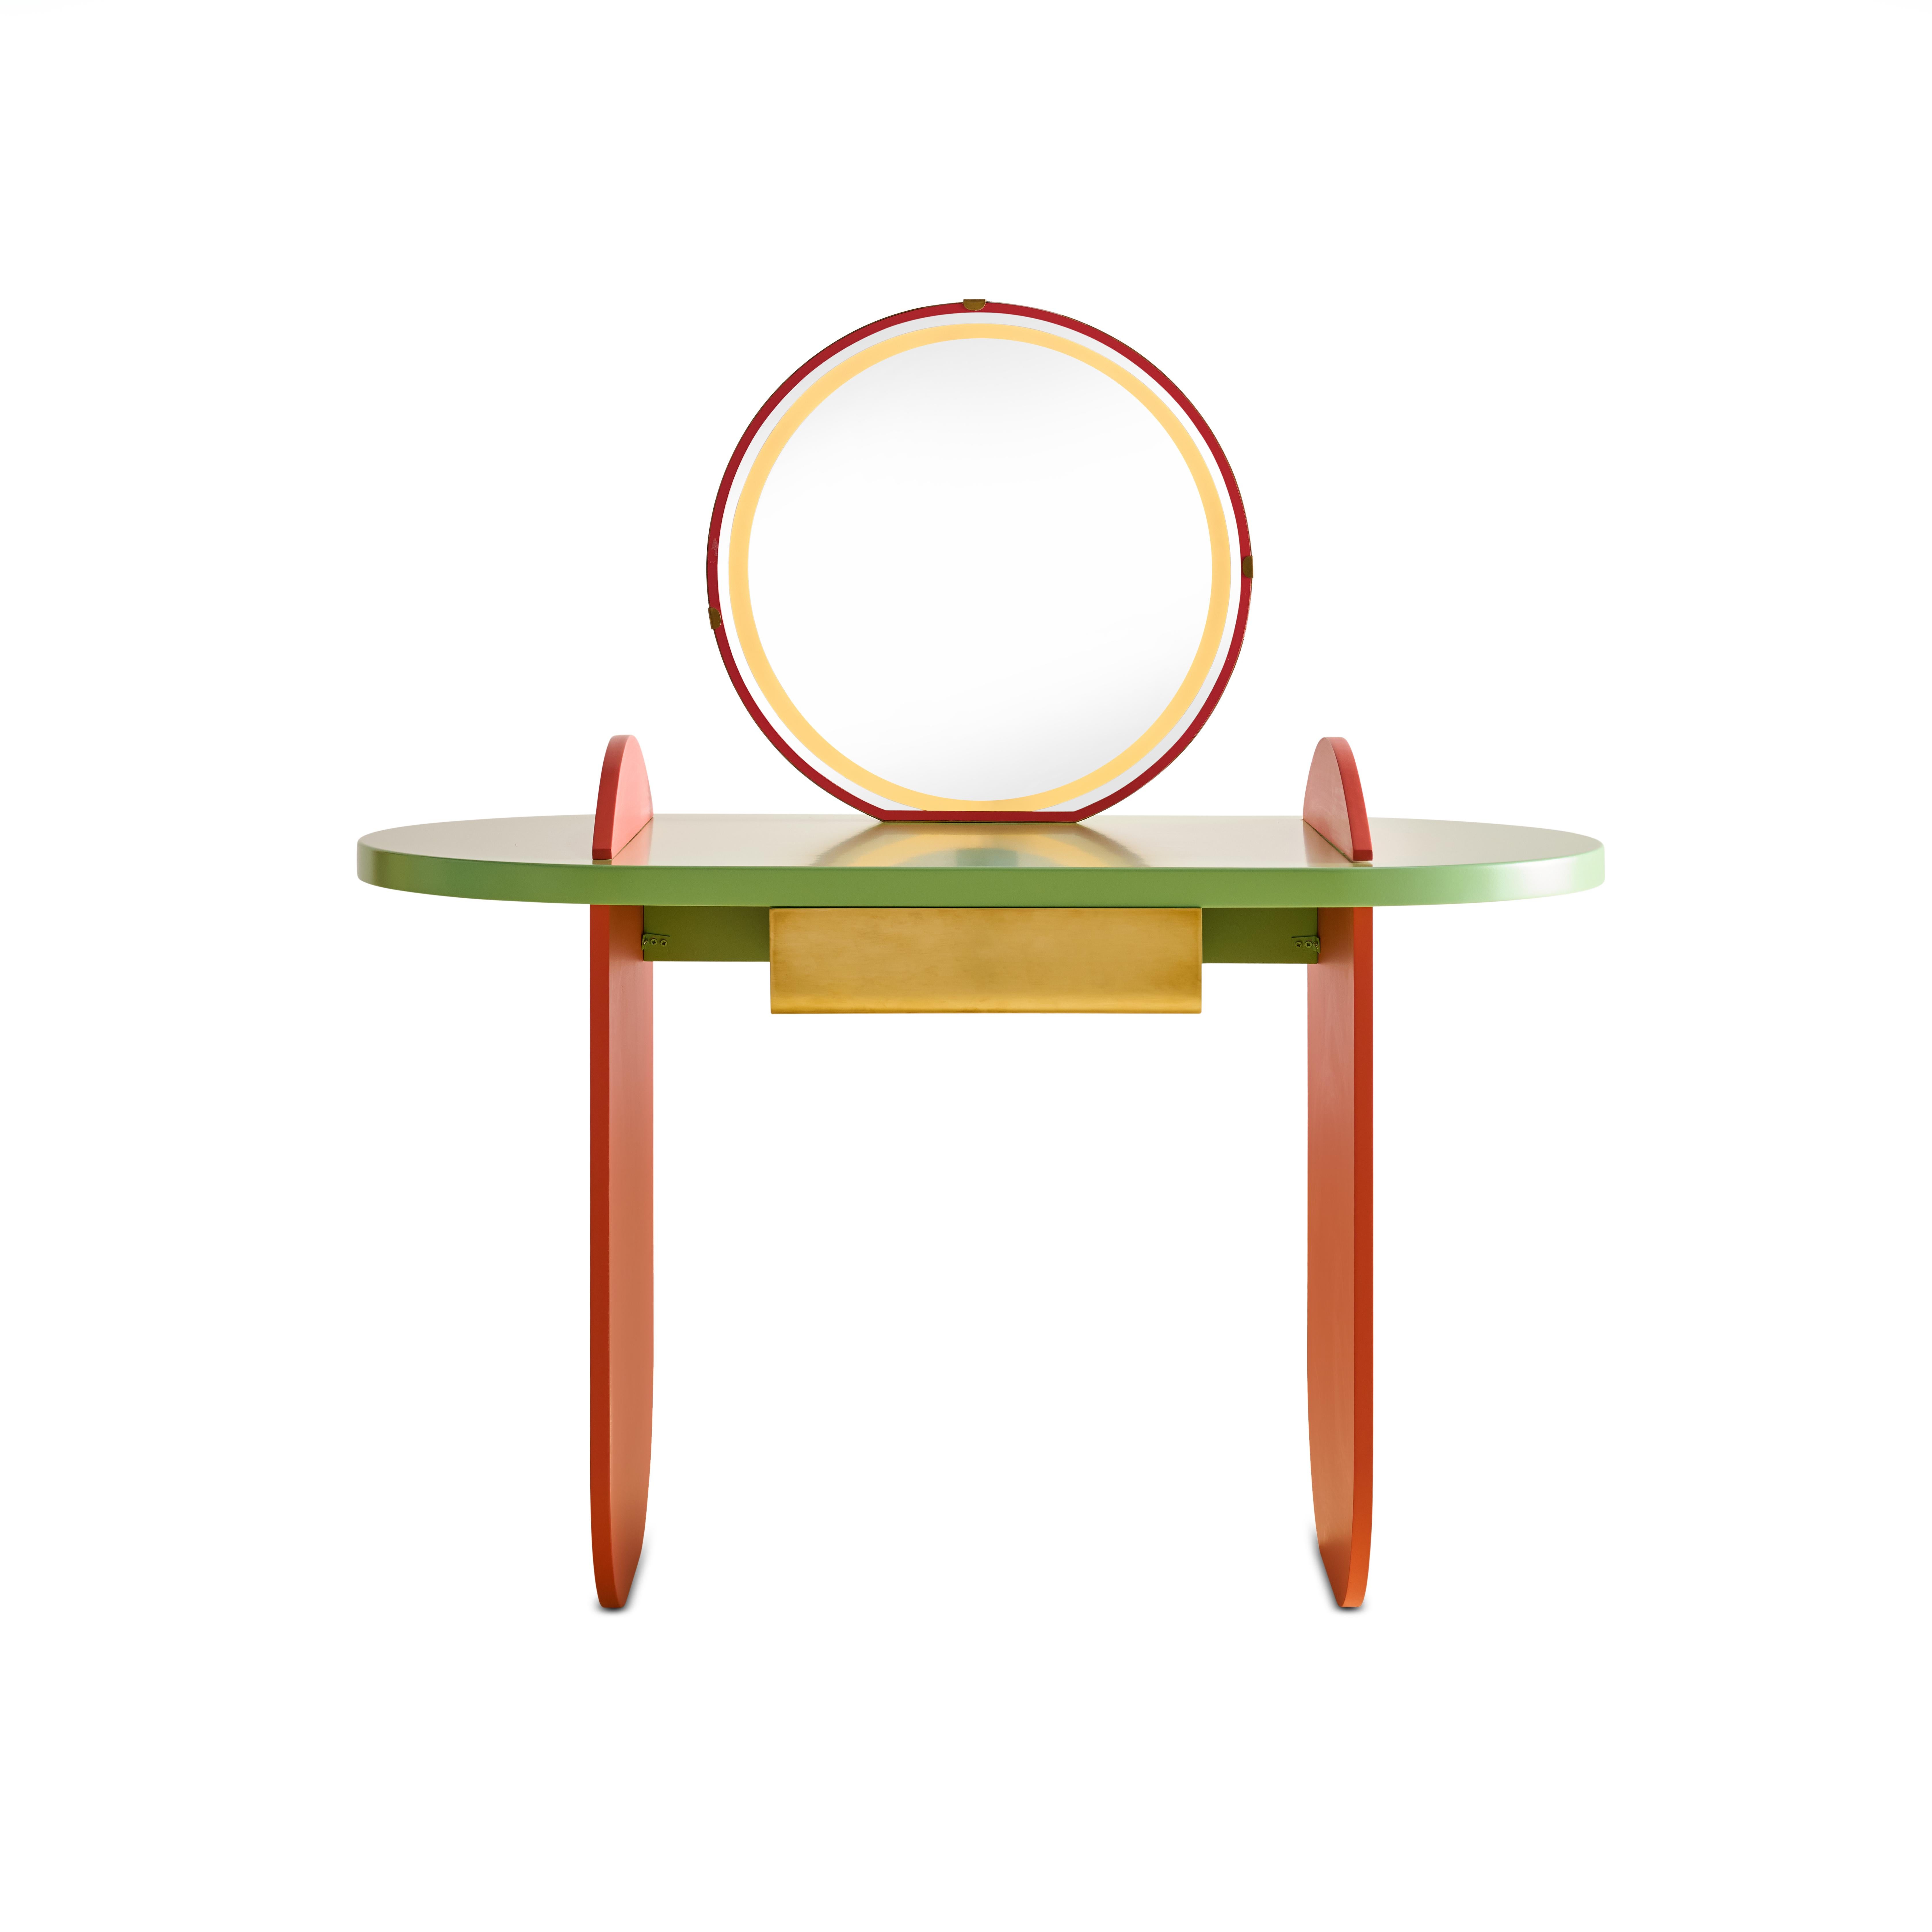 A pop of fun intended to uplift the make-up experience. This
table comprises of simple forms but speaks brightly with salmon
colored bases contrasted with a pistachio countertop. A backlit,
soft glow mirror that always puts you in the right